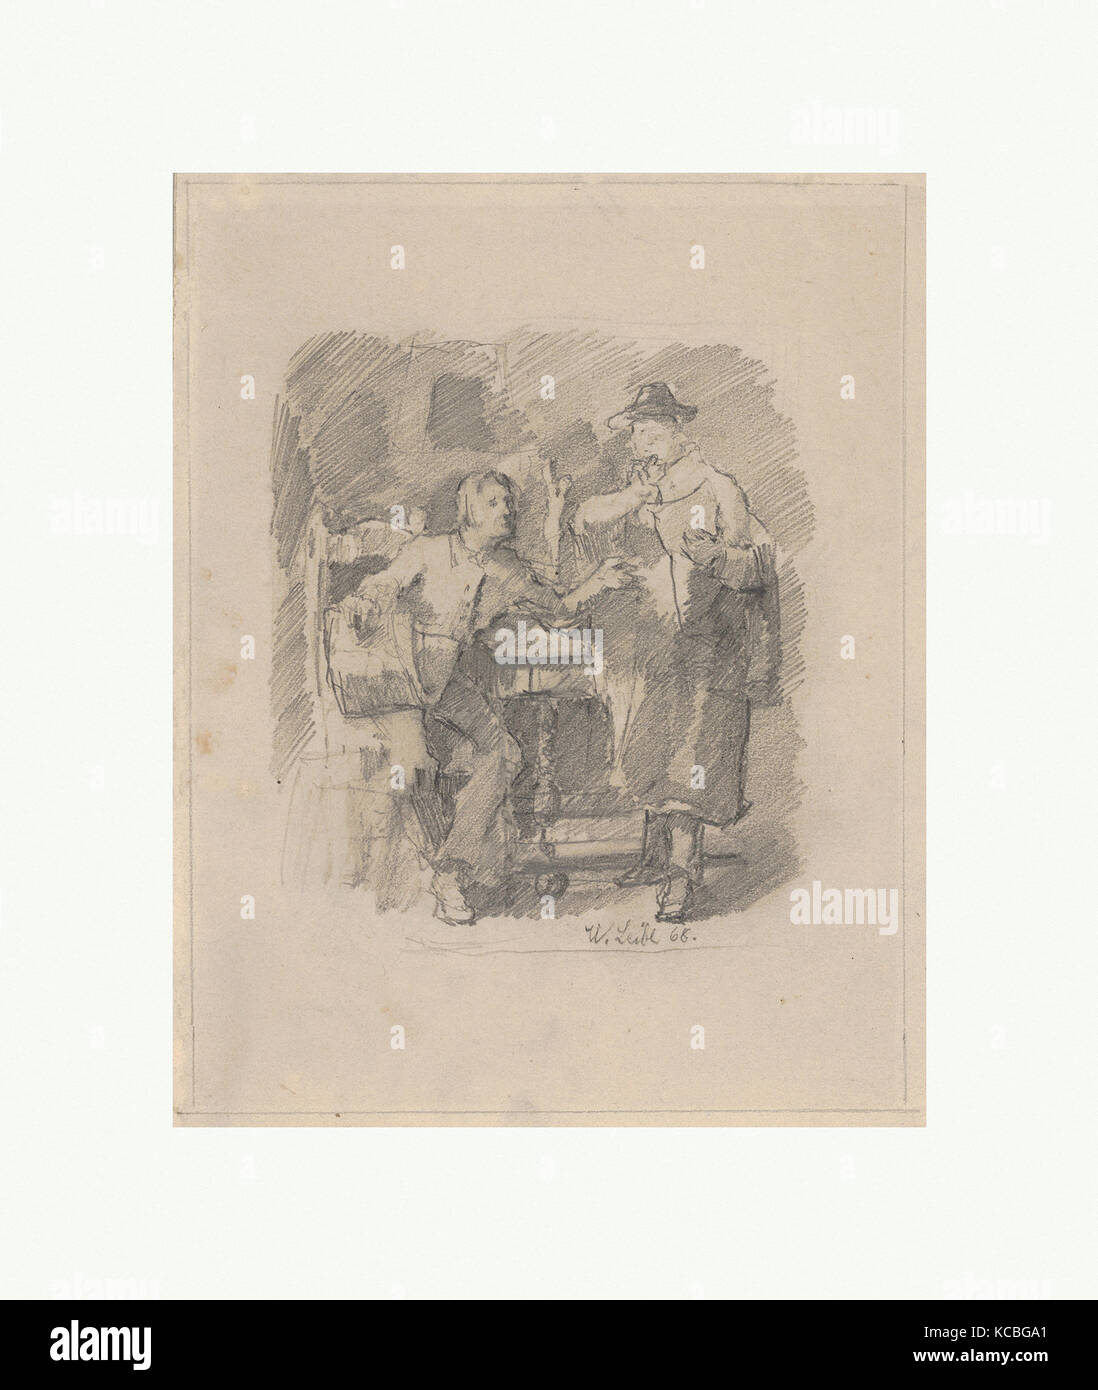 The Critic; verso: Study for The Critic, Wilhelm Maria Hubertus Leibl, 1868 Stock Photo